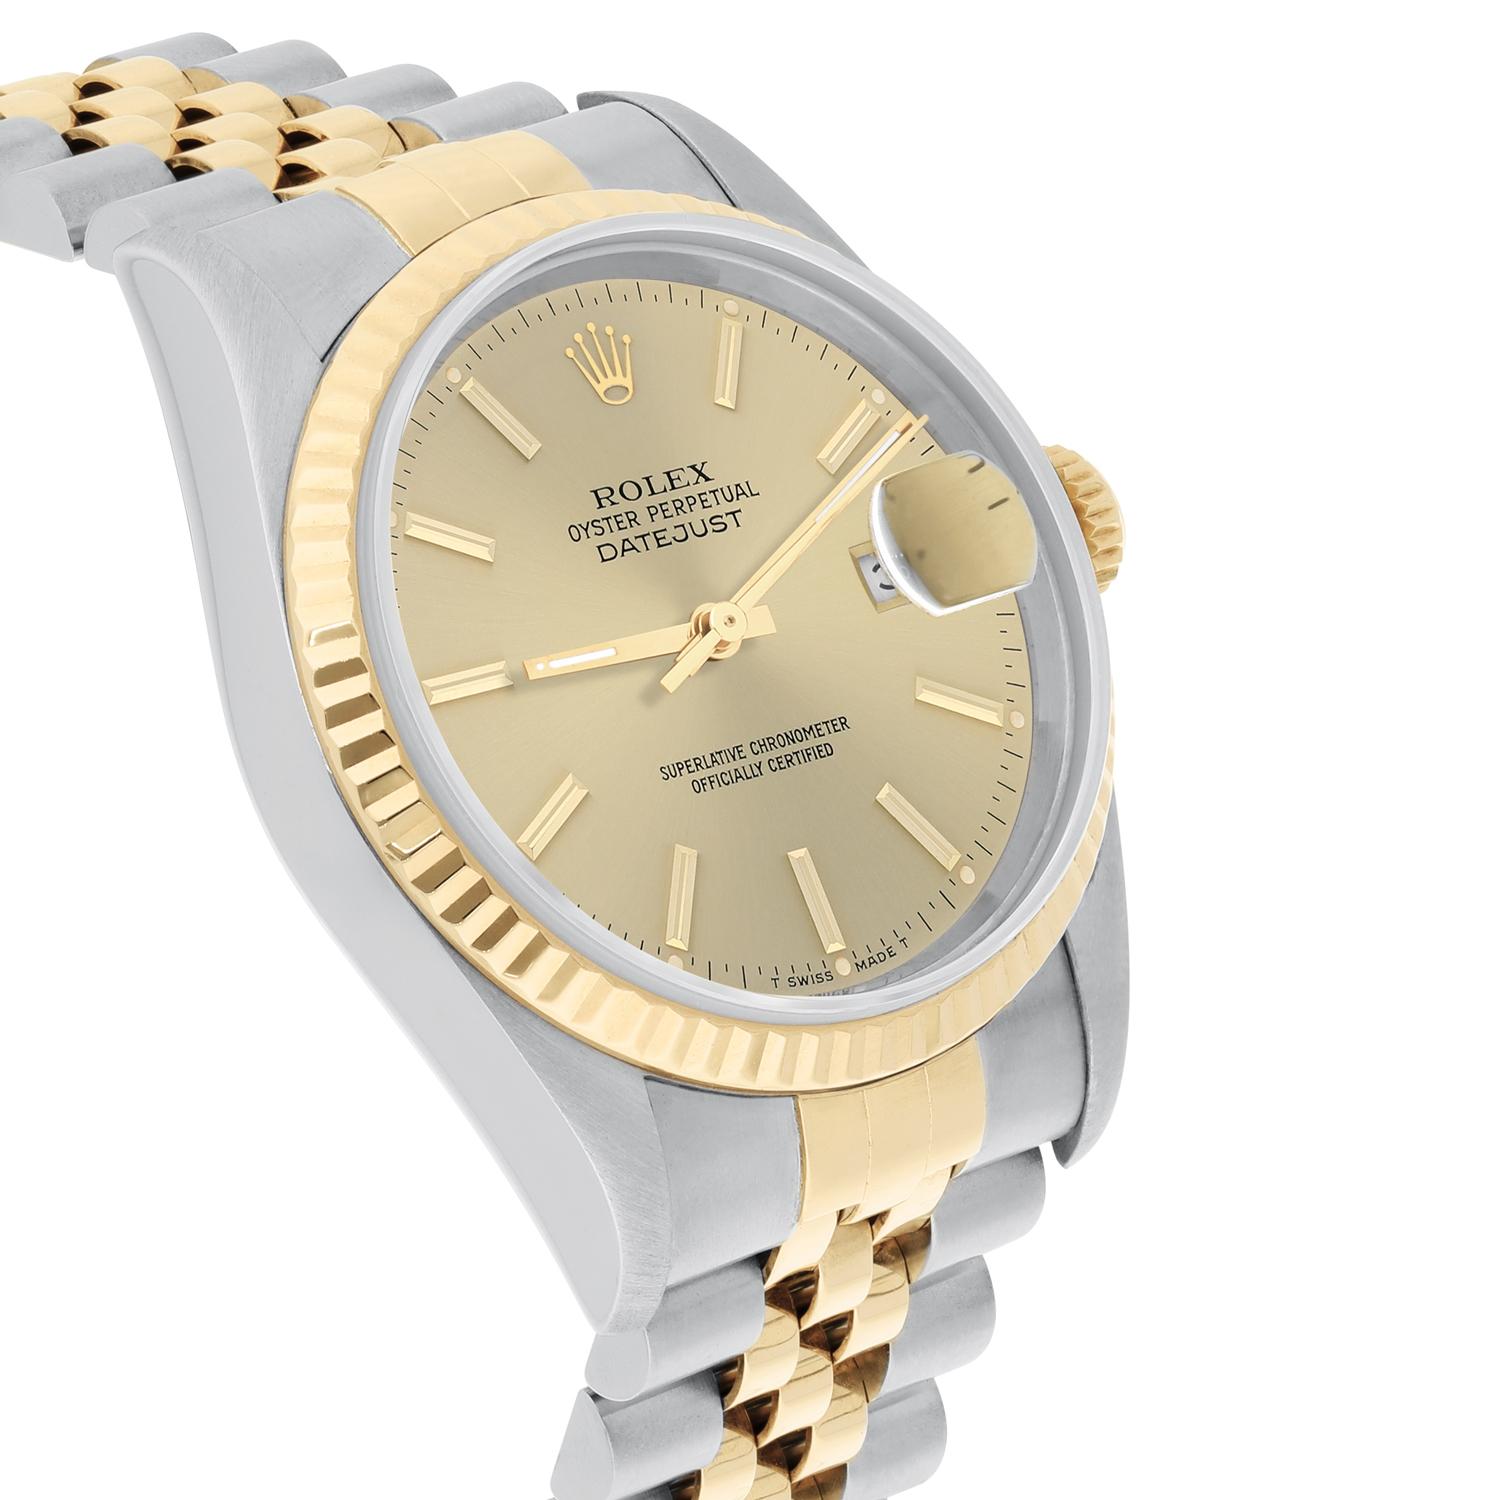 Rolex Datejust 36mm Two Tone Champagne Index Dial Jubilee 16233 Circa 1995 Unisexe en vente